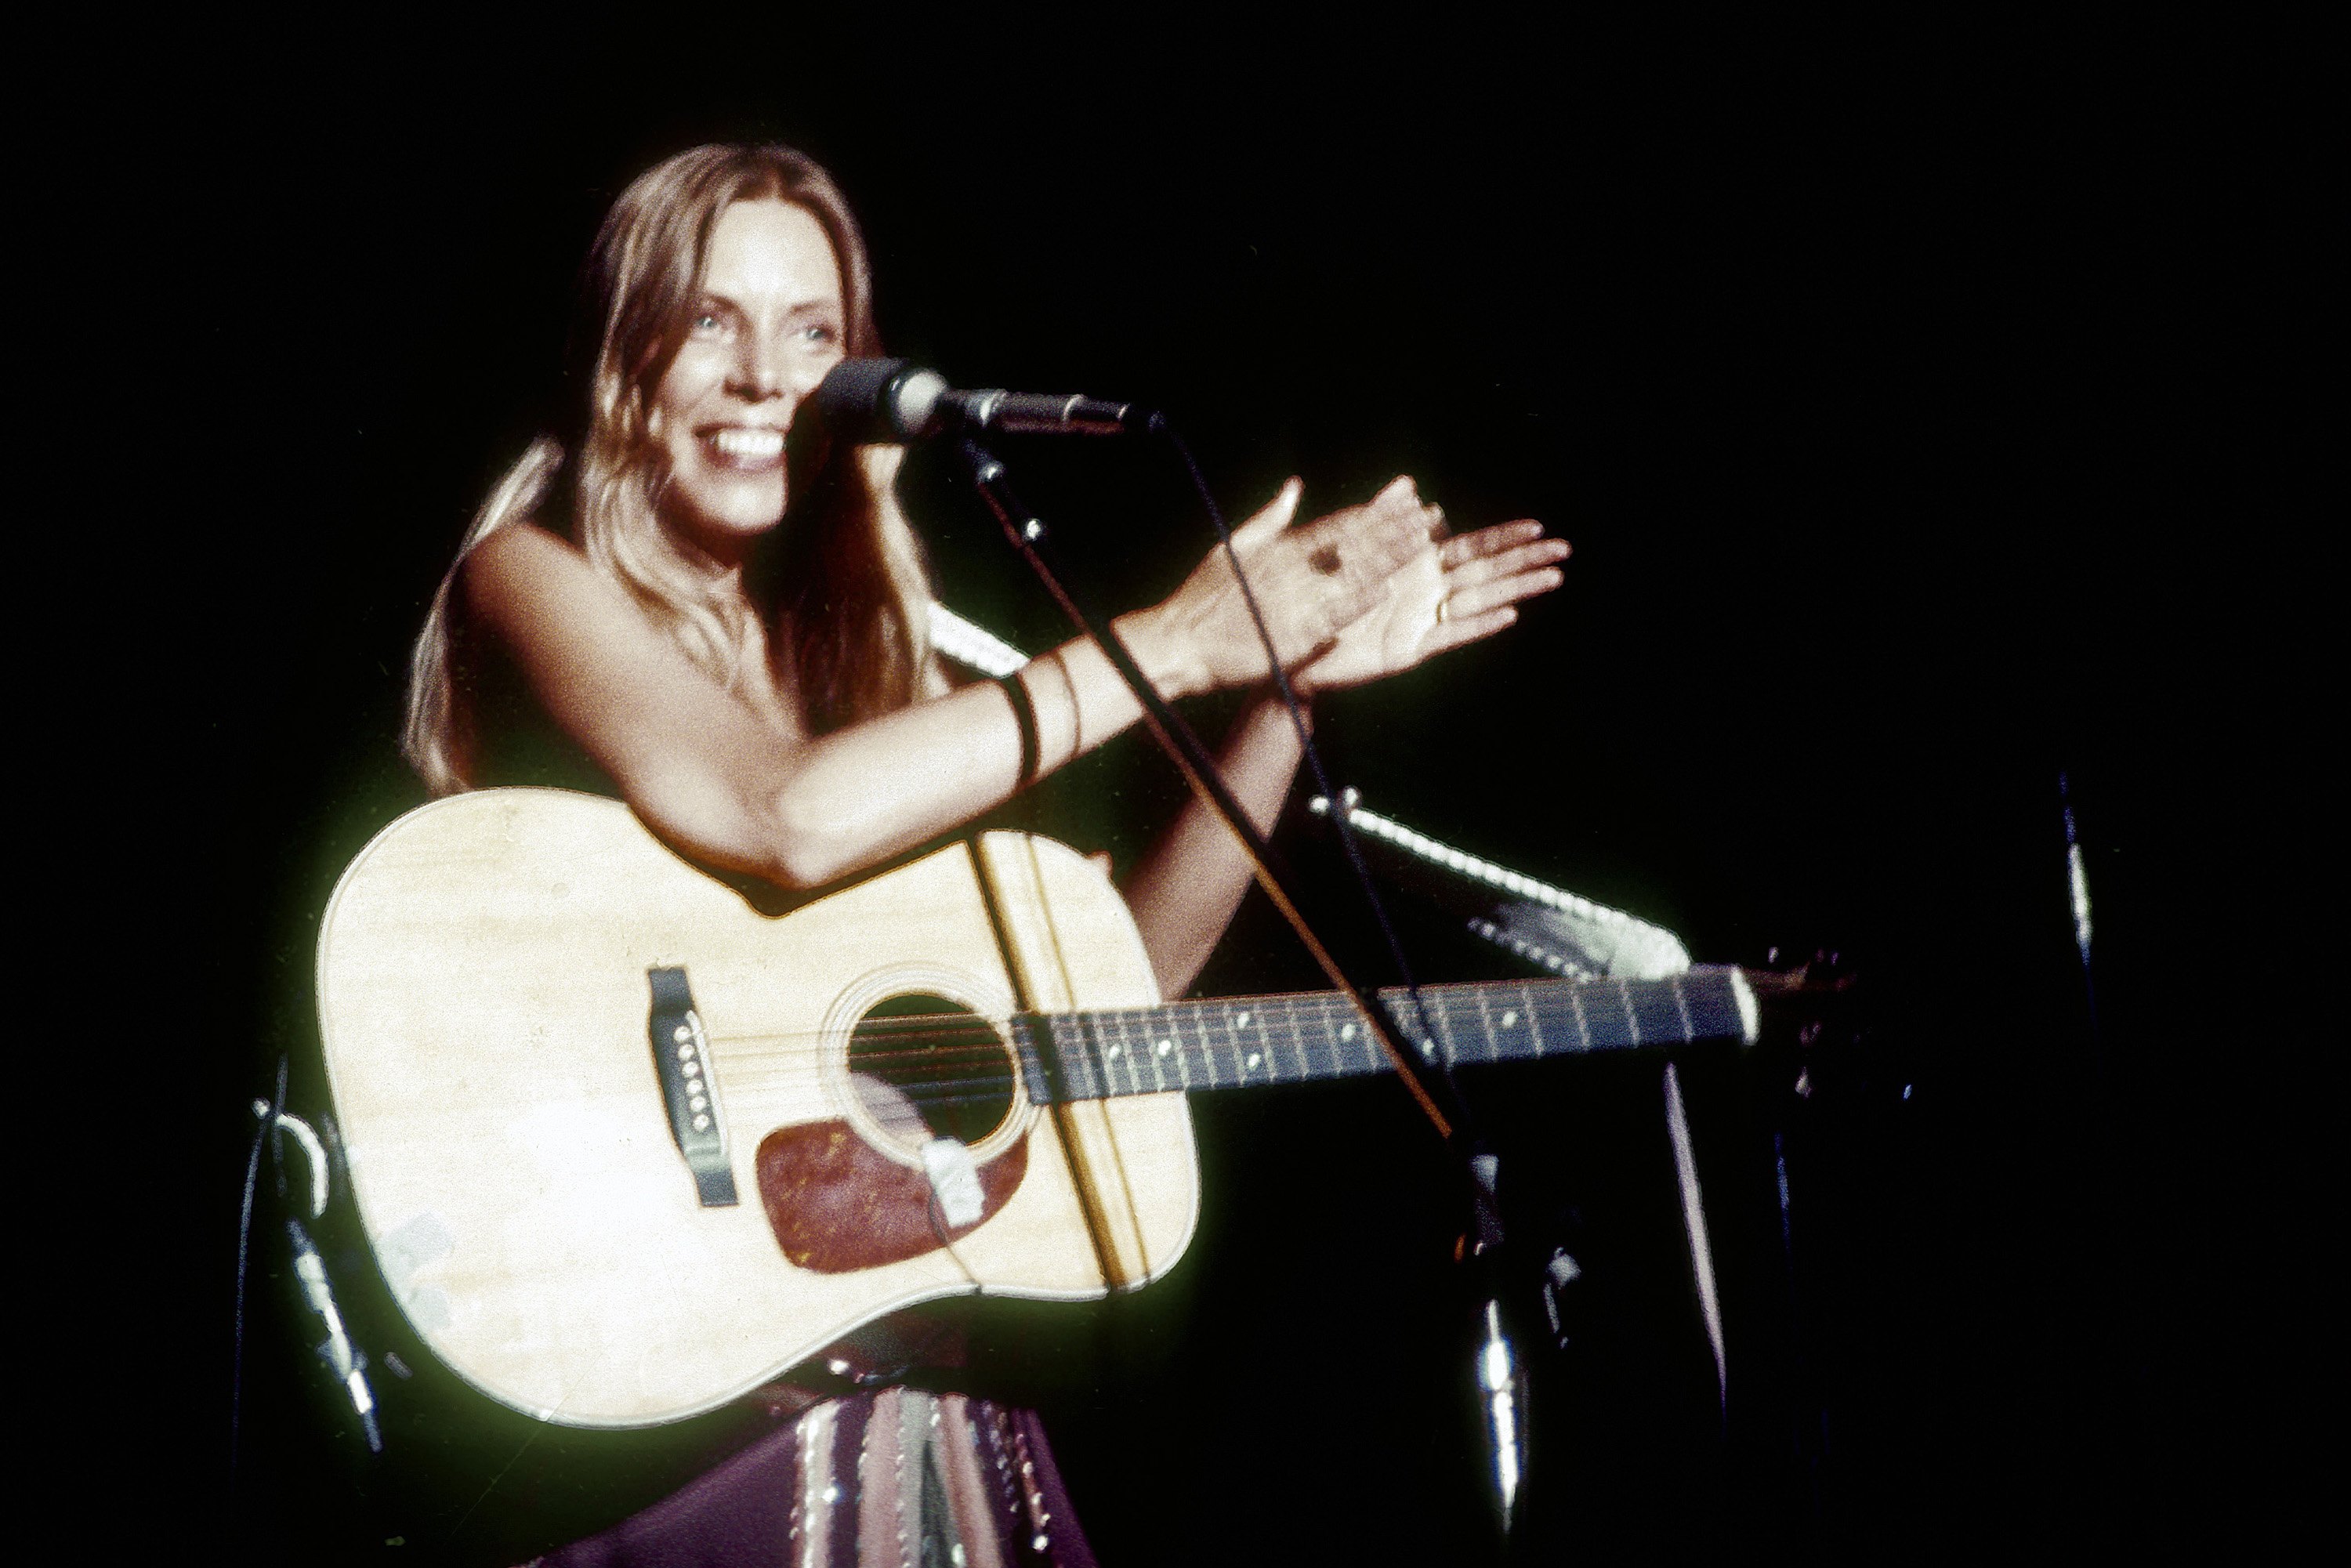 Joni Mitchell stands in front of a microphone with a guitar and claps her hands.